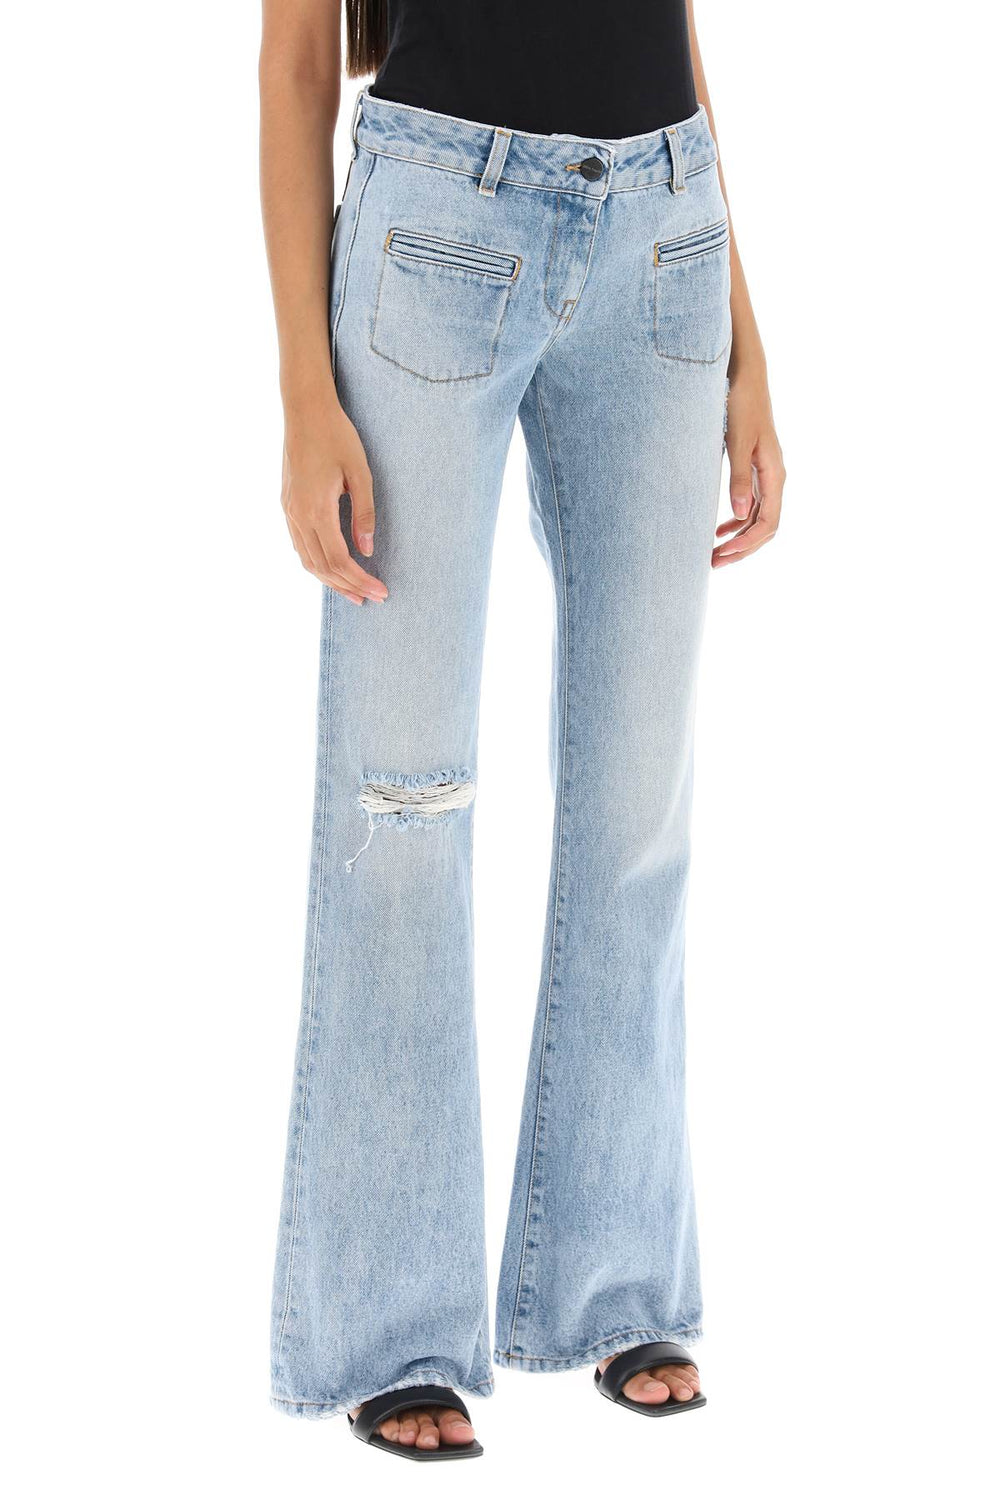 Palm angels low-rise waist bootcut jeans-1